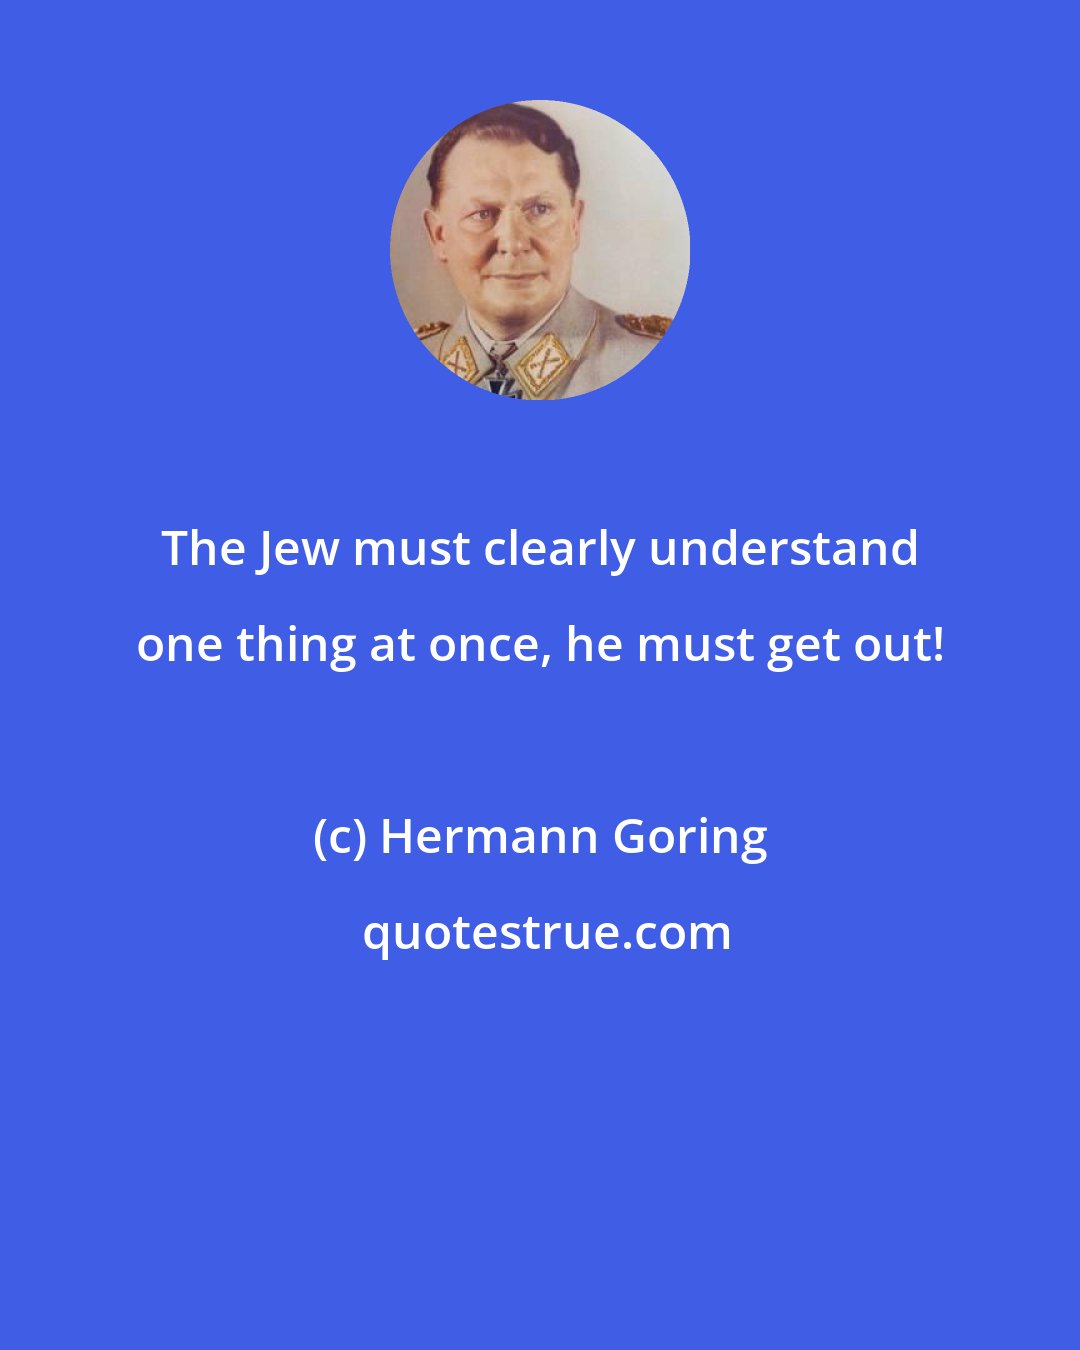 Hermann Goring: The Jew must clearly understand one thing at once, he must get out!